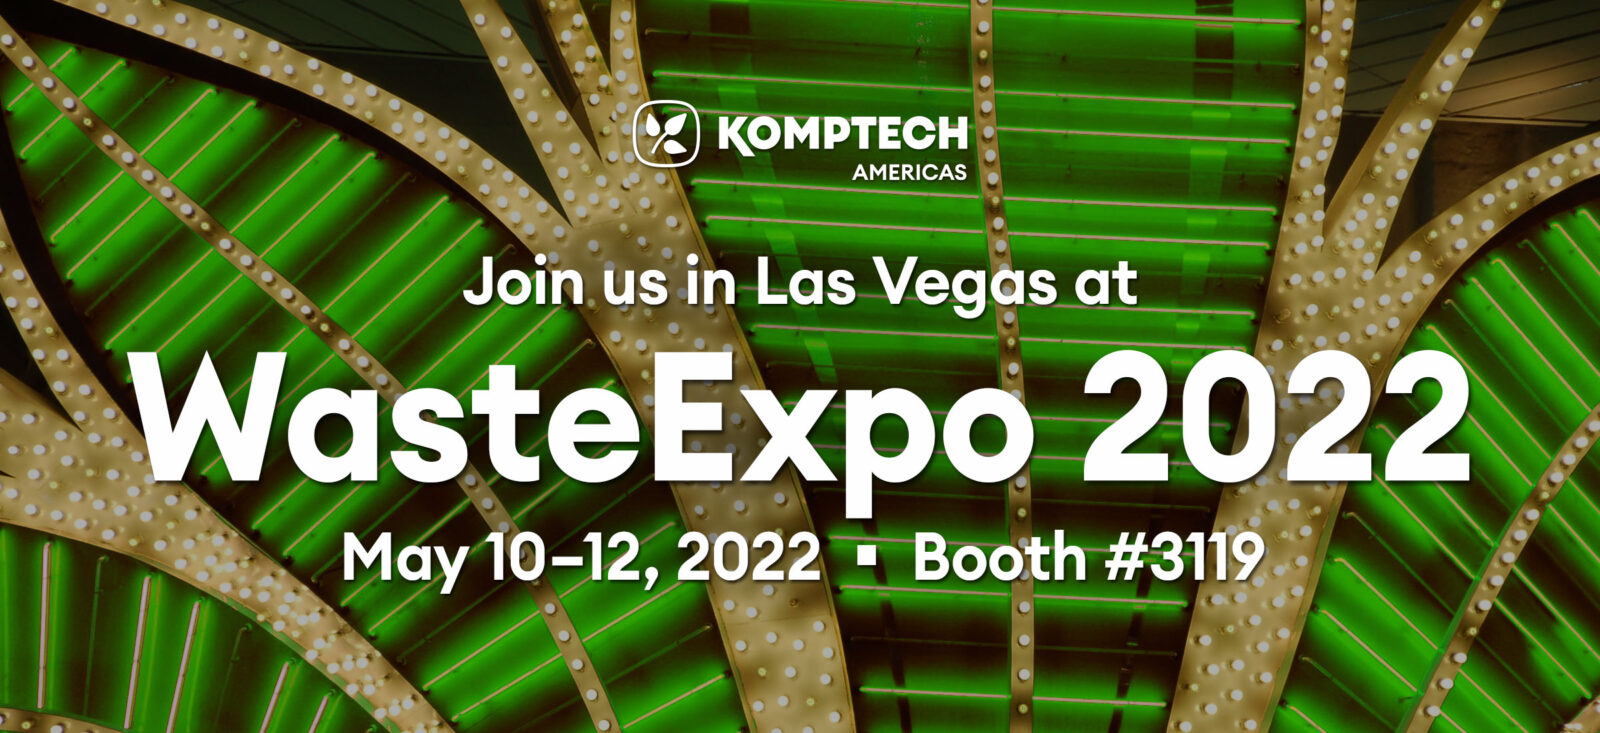 EVENT Waste Expo 2022 Conference and Tradeshow Komptech Americas